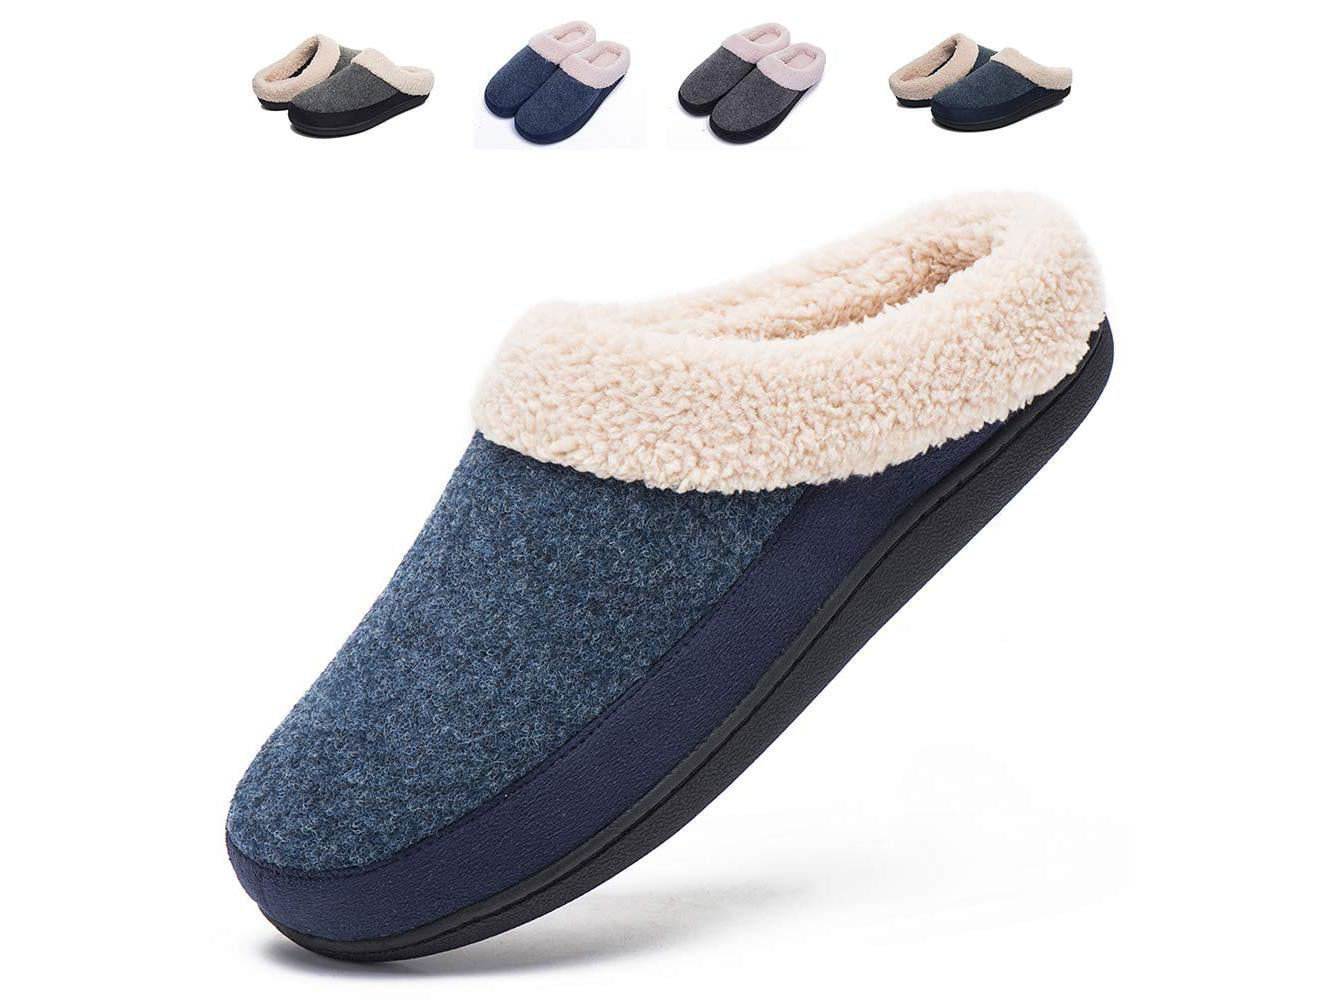 Ladies Slipper House Memory Foam Slippers Comfort and Warm Slippers for Mens and Womens Indoor Outdoor Non-Slip Plush Slippers